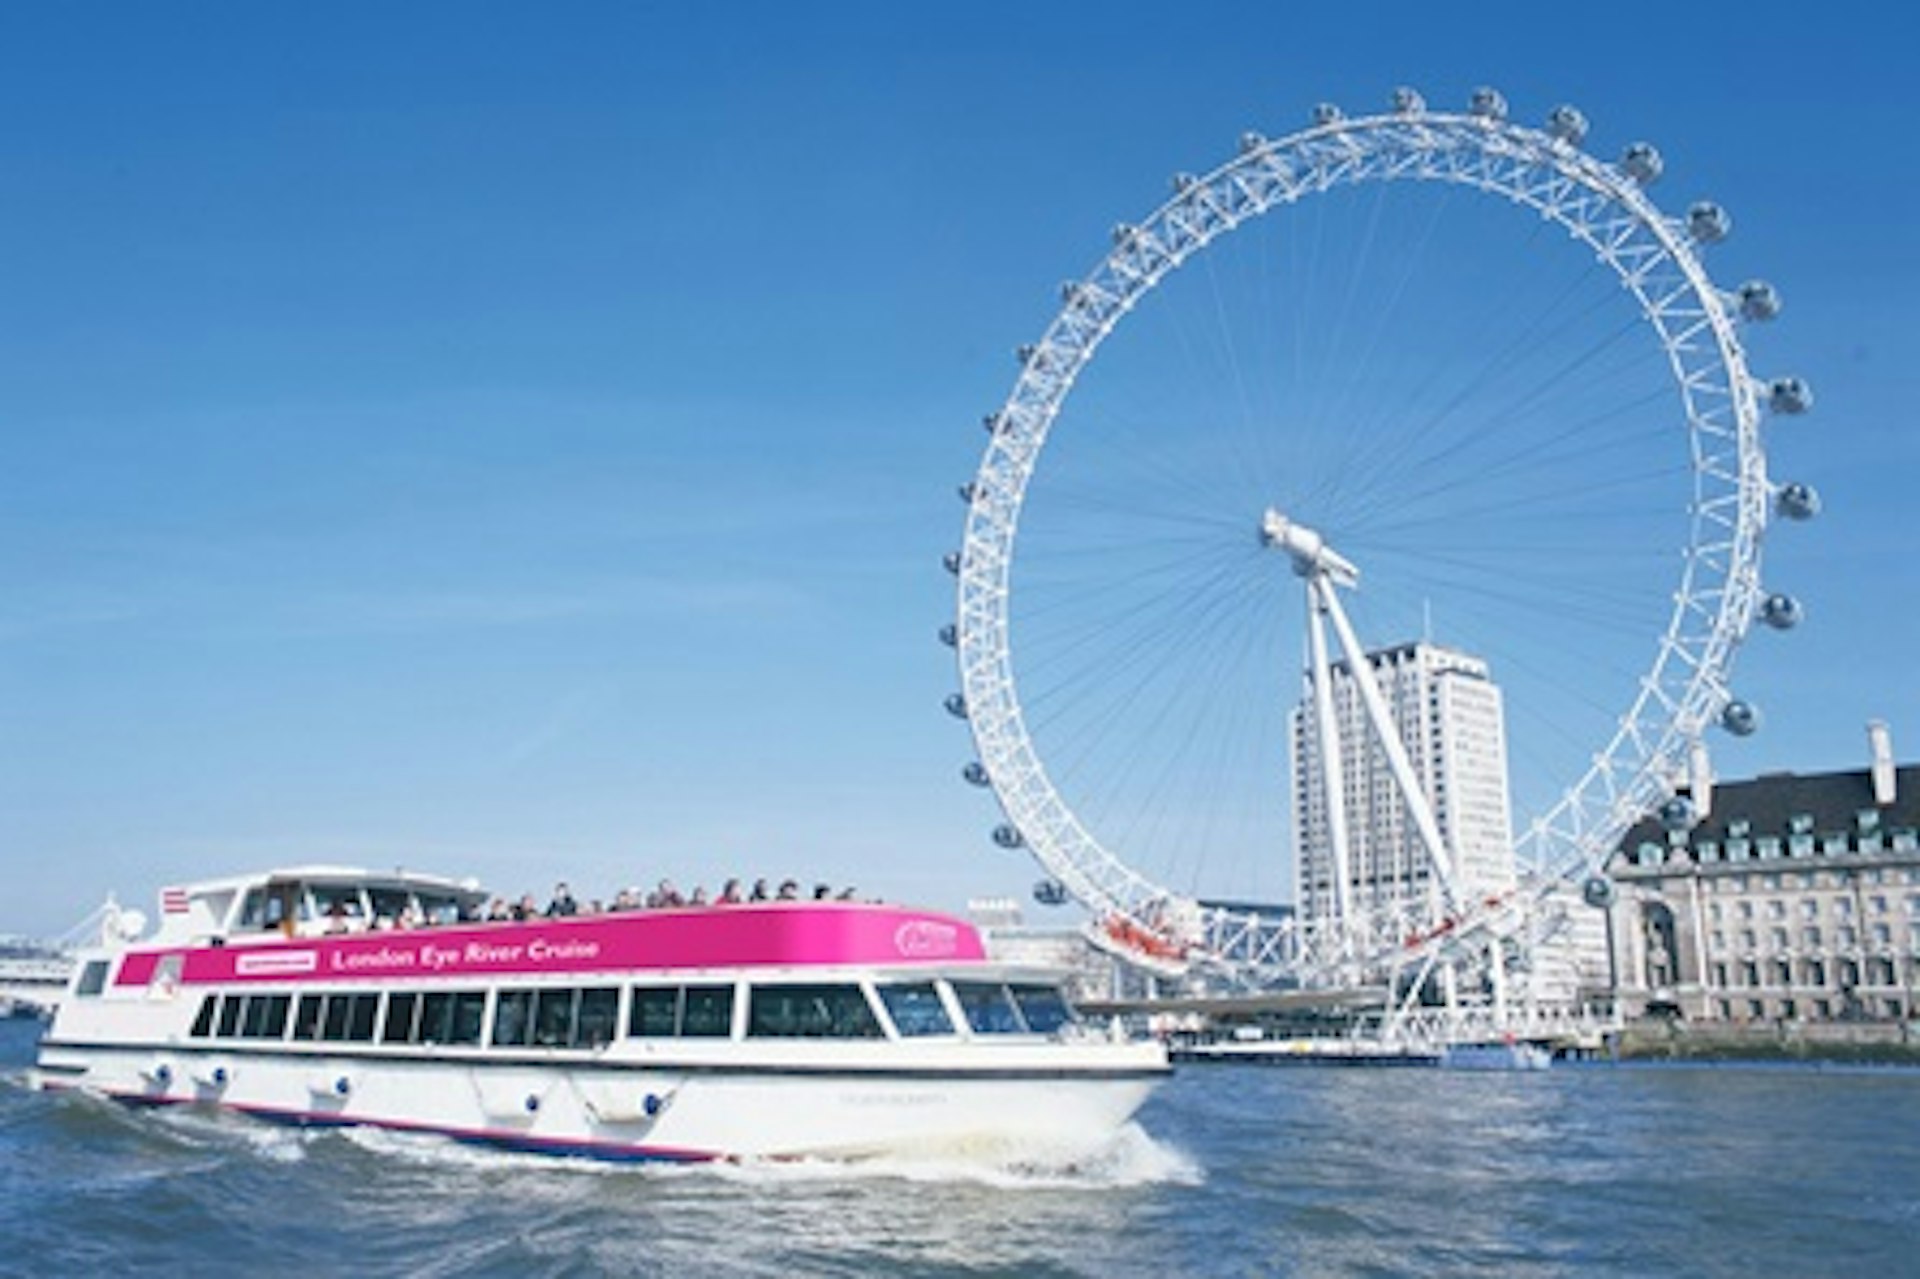 Visit to Lastminute.com London Eye with London Eye River Cruise - Two Adults and One Child 1